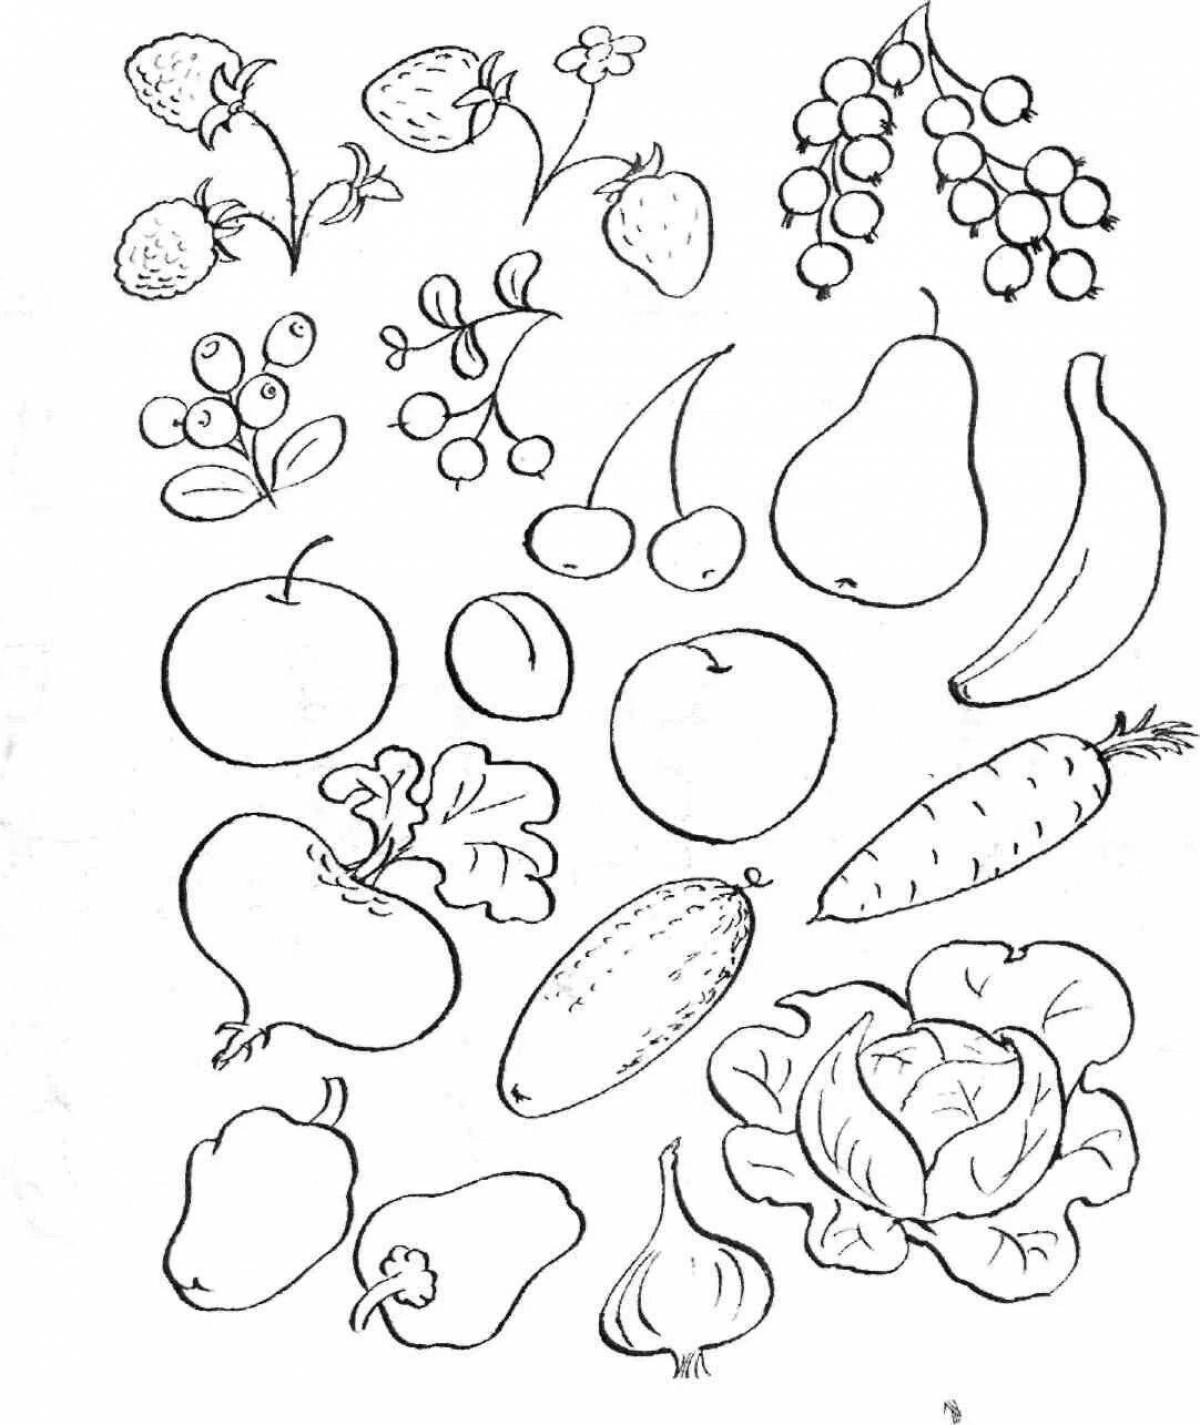 Fun fruits and vegetables coloring book